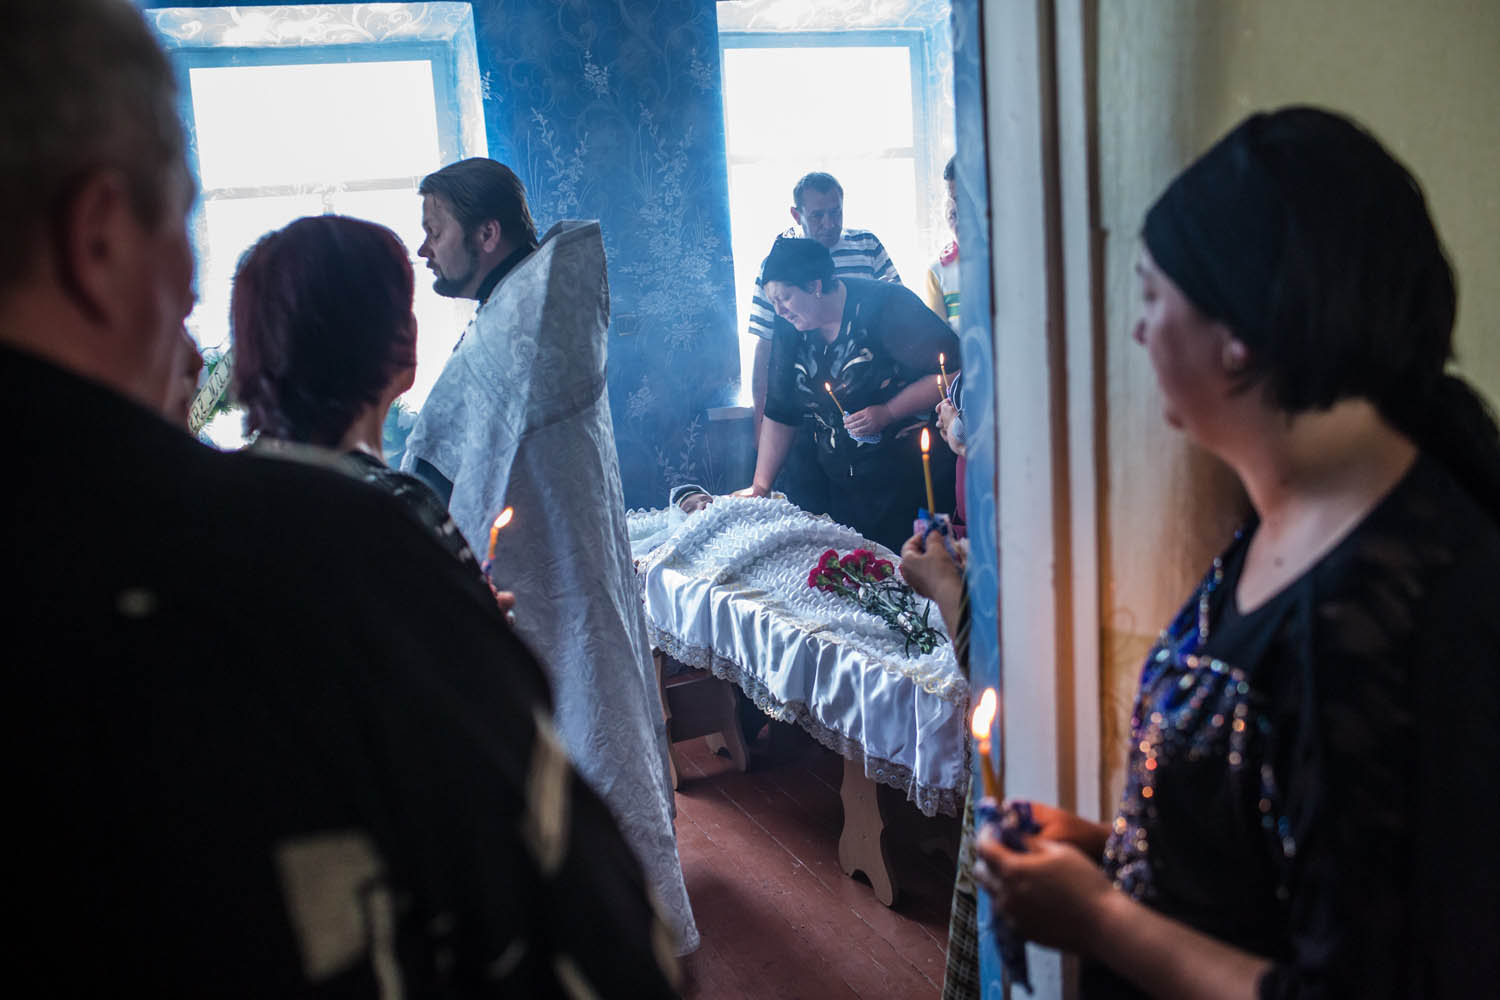 May 16, 2014. Mourners attend the funeral of Elena Ott, 42, in Starovarvarovka, Ukraine. Ott was killed two days prior when the car she was riding in was fired on by forces her family believes to be the Ukrainian military.